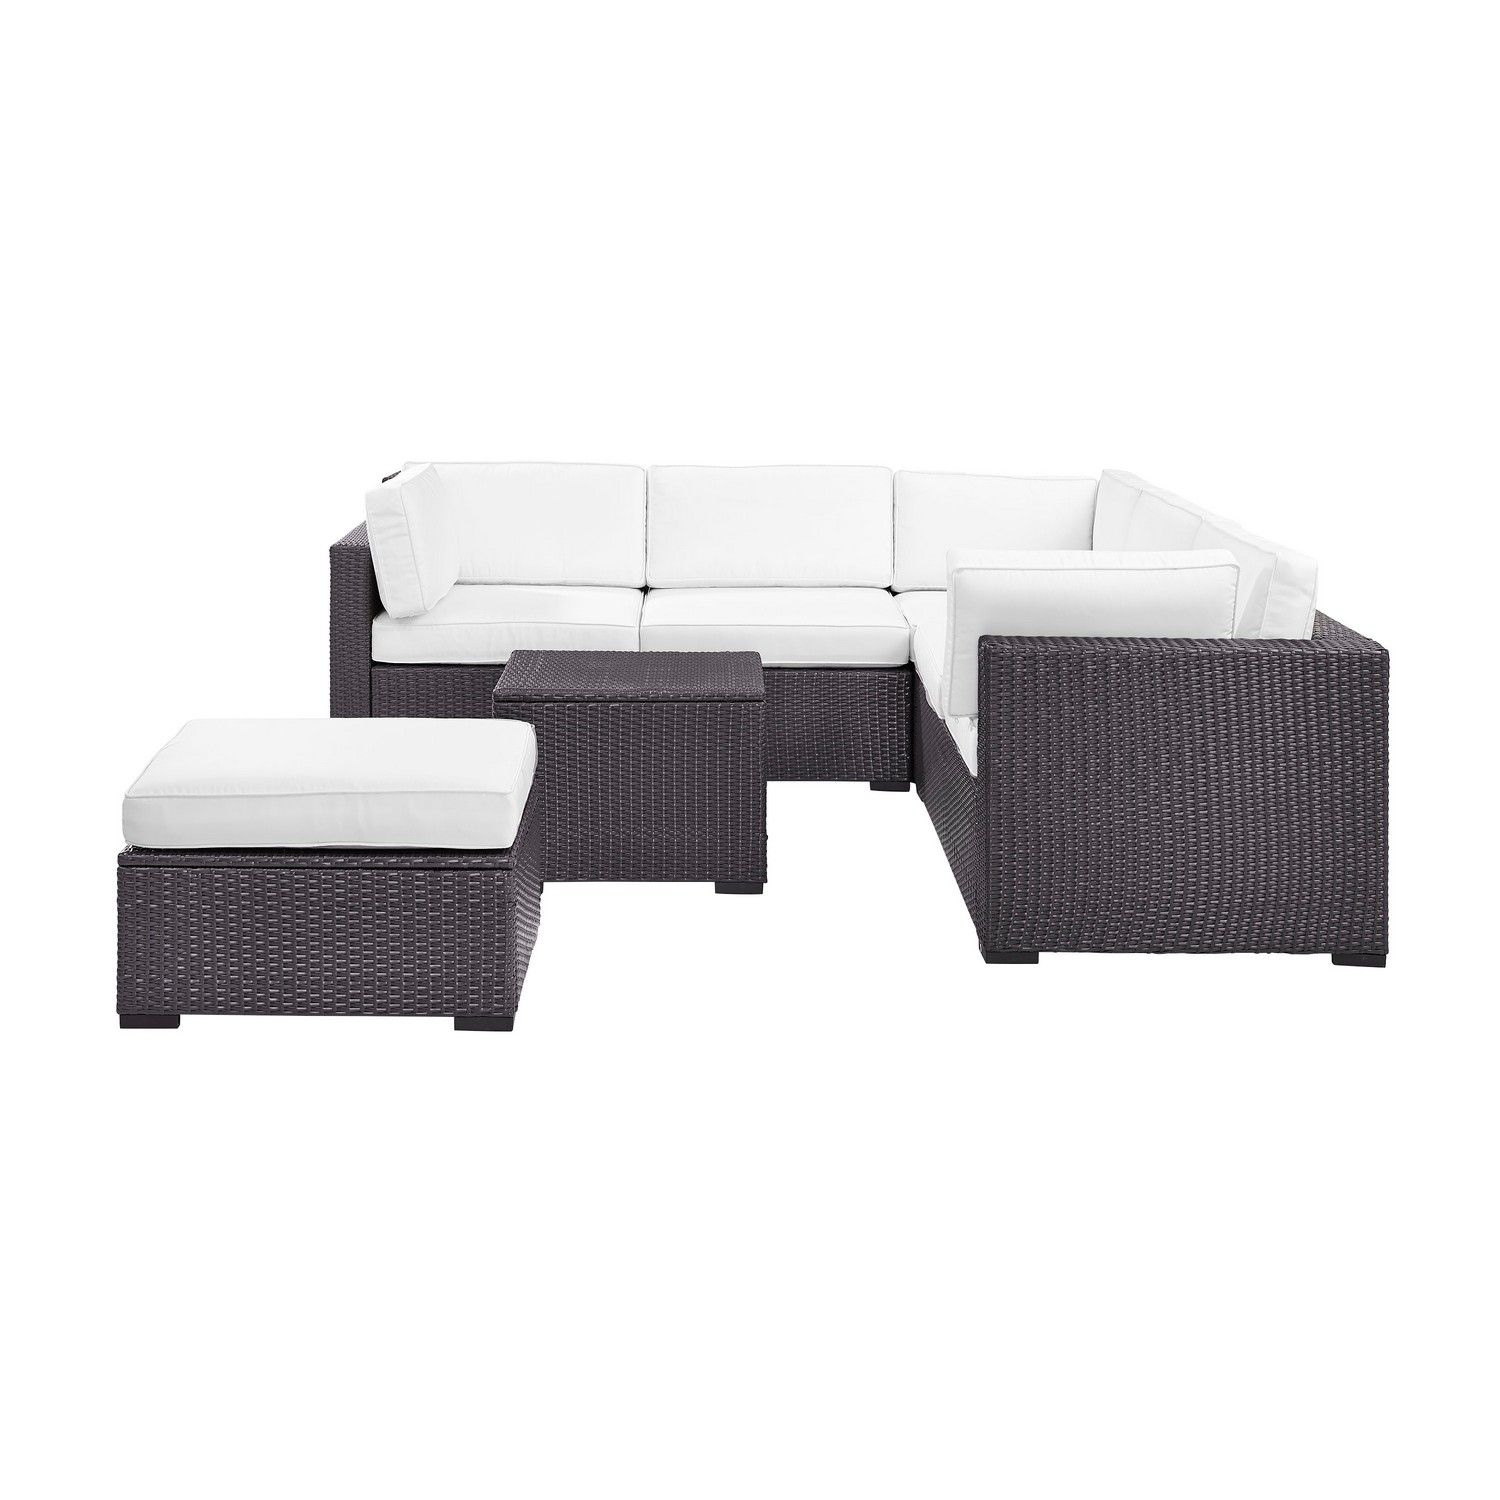 Crosley Biscayne 5-PC Outdoor Wicker Sectional Set - 2 Loveseats, Corner Chair, Coffee Table, Ottoman - White/Brown